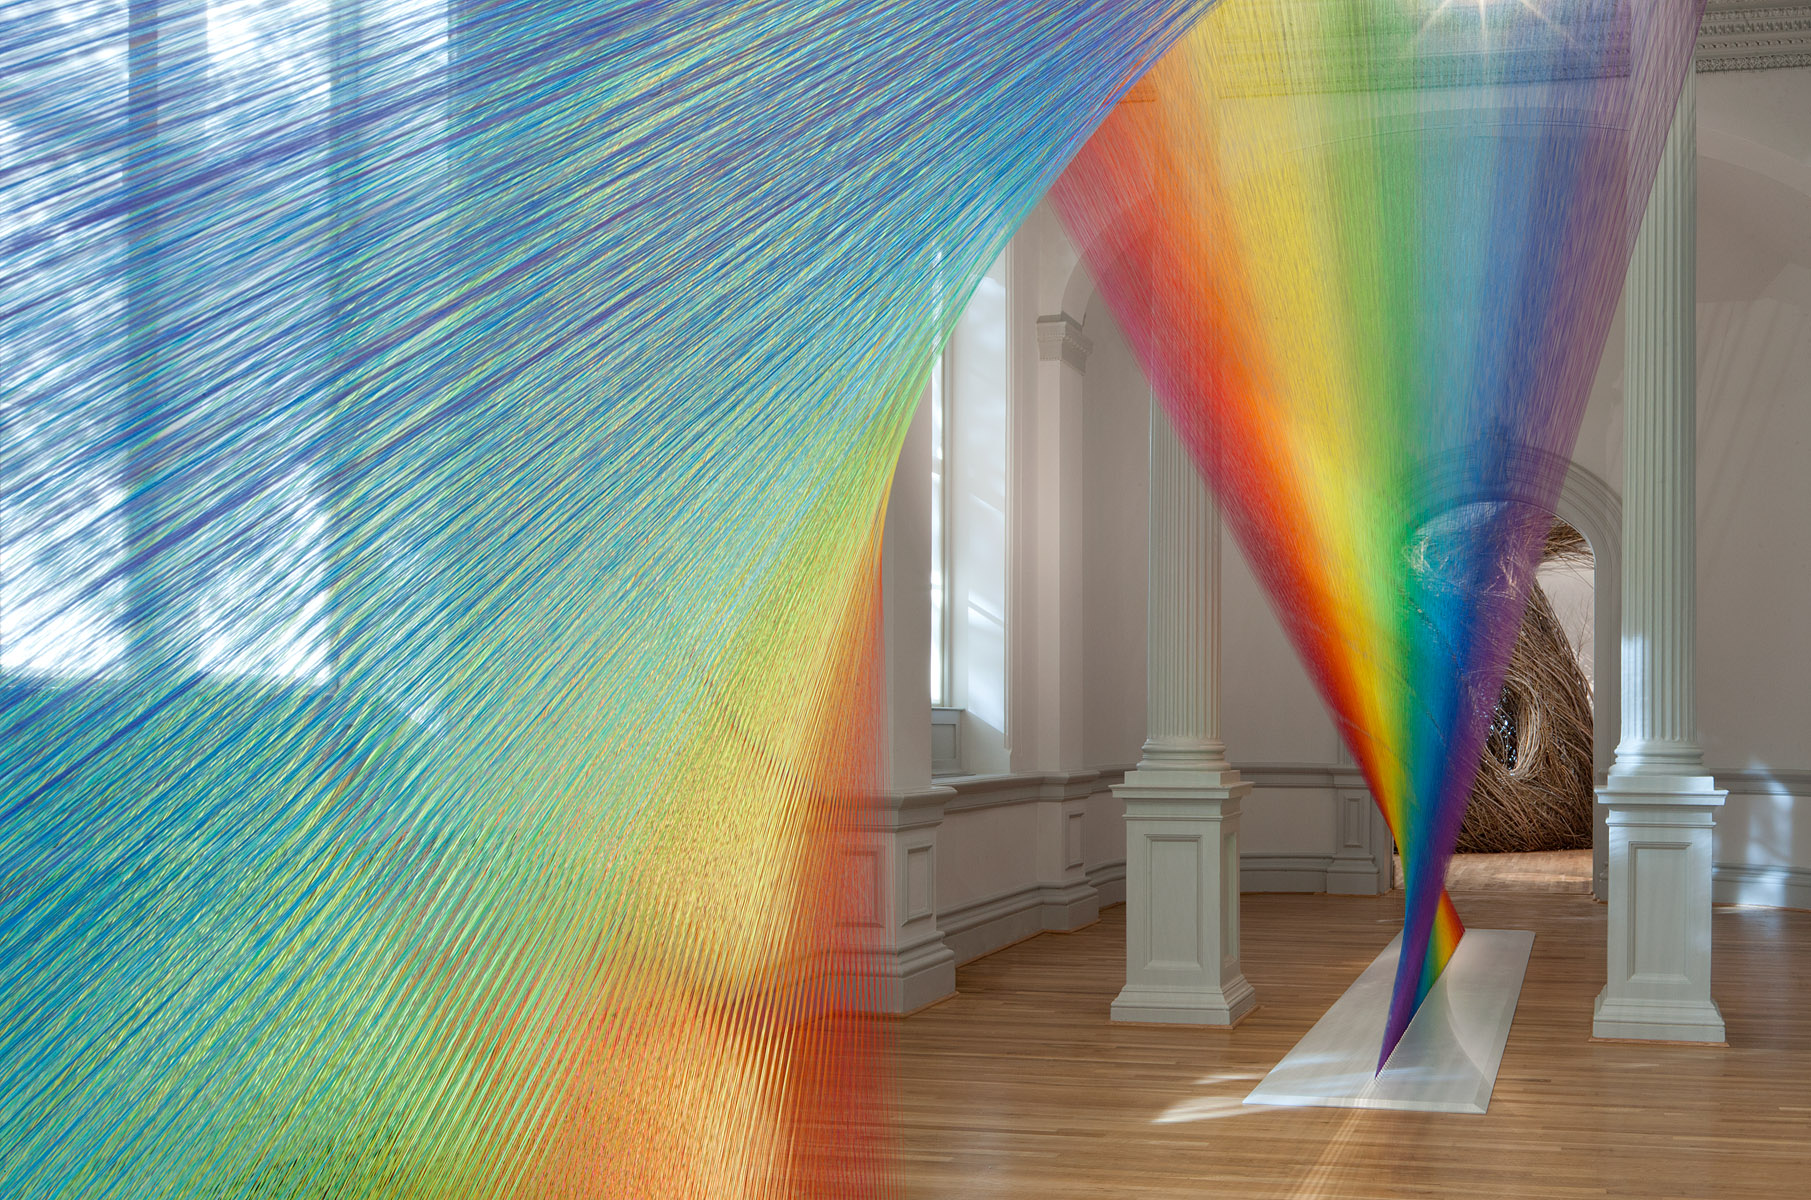 It Took 88km Of Sewing Thread To Create This Complete Spectrum Of Visible Colour 